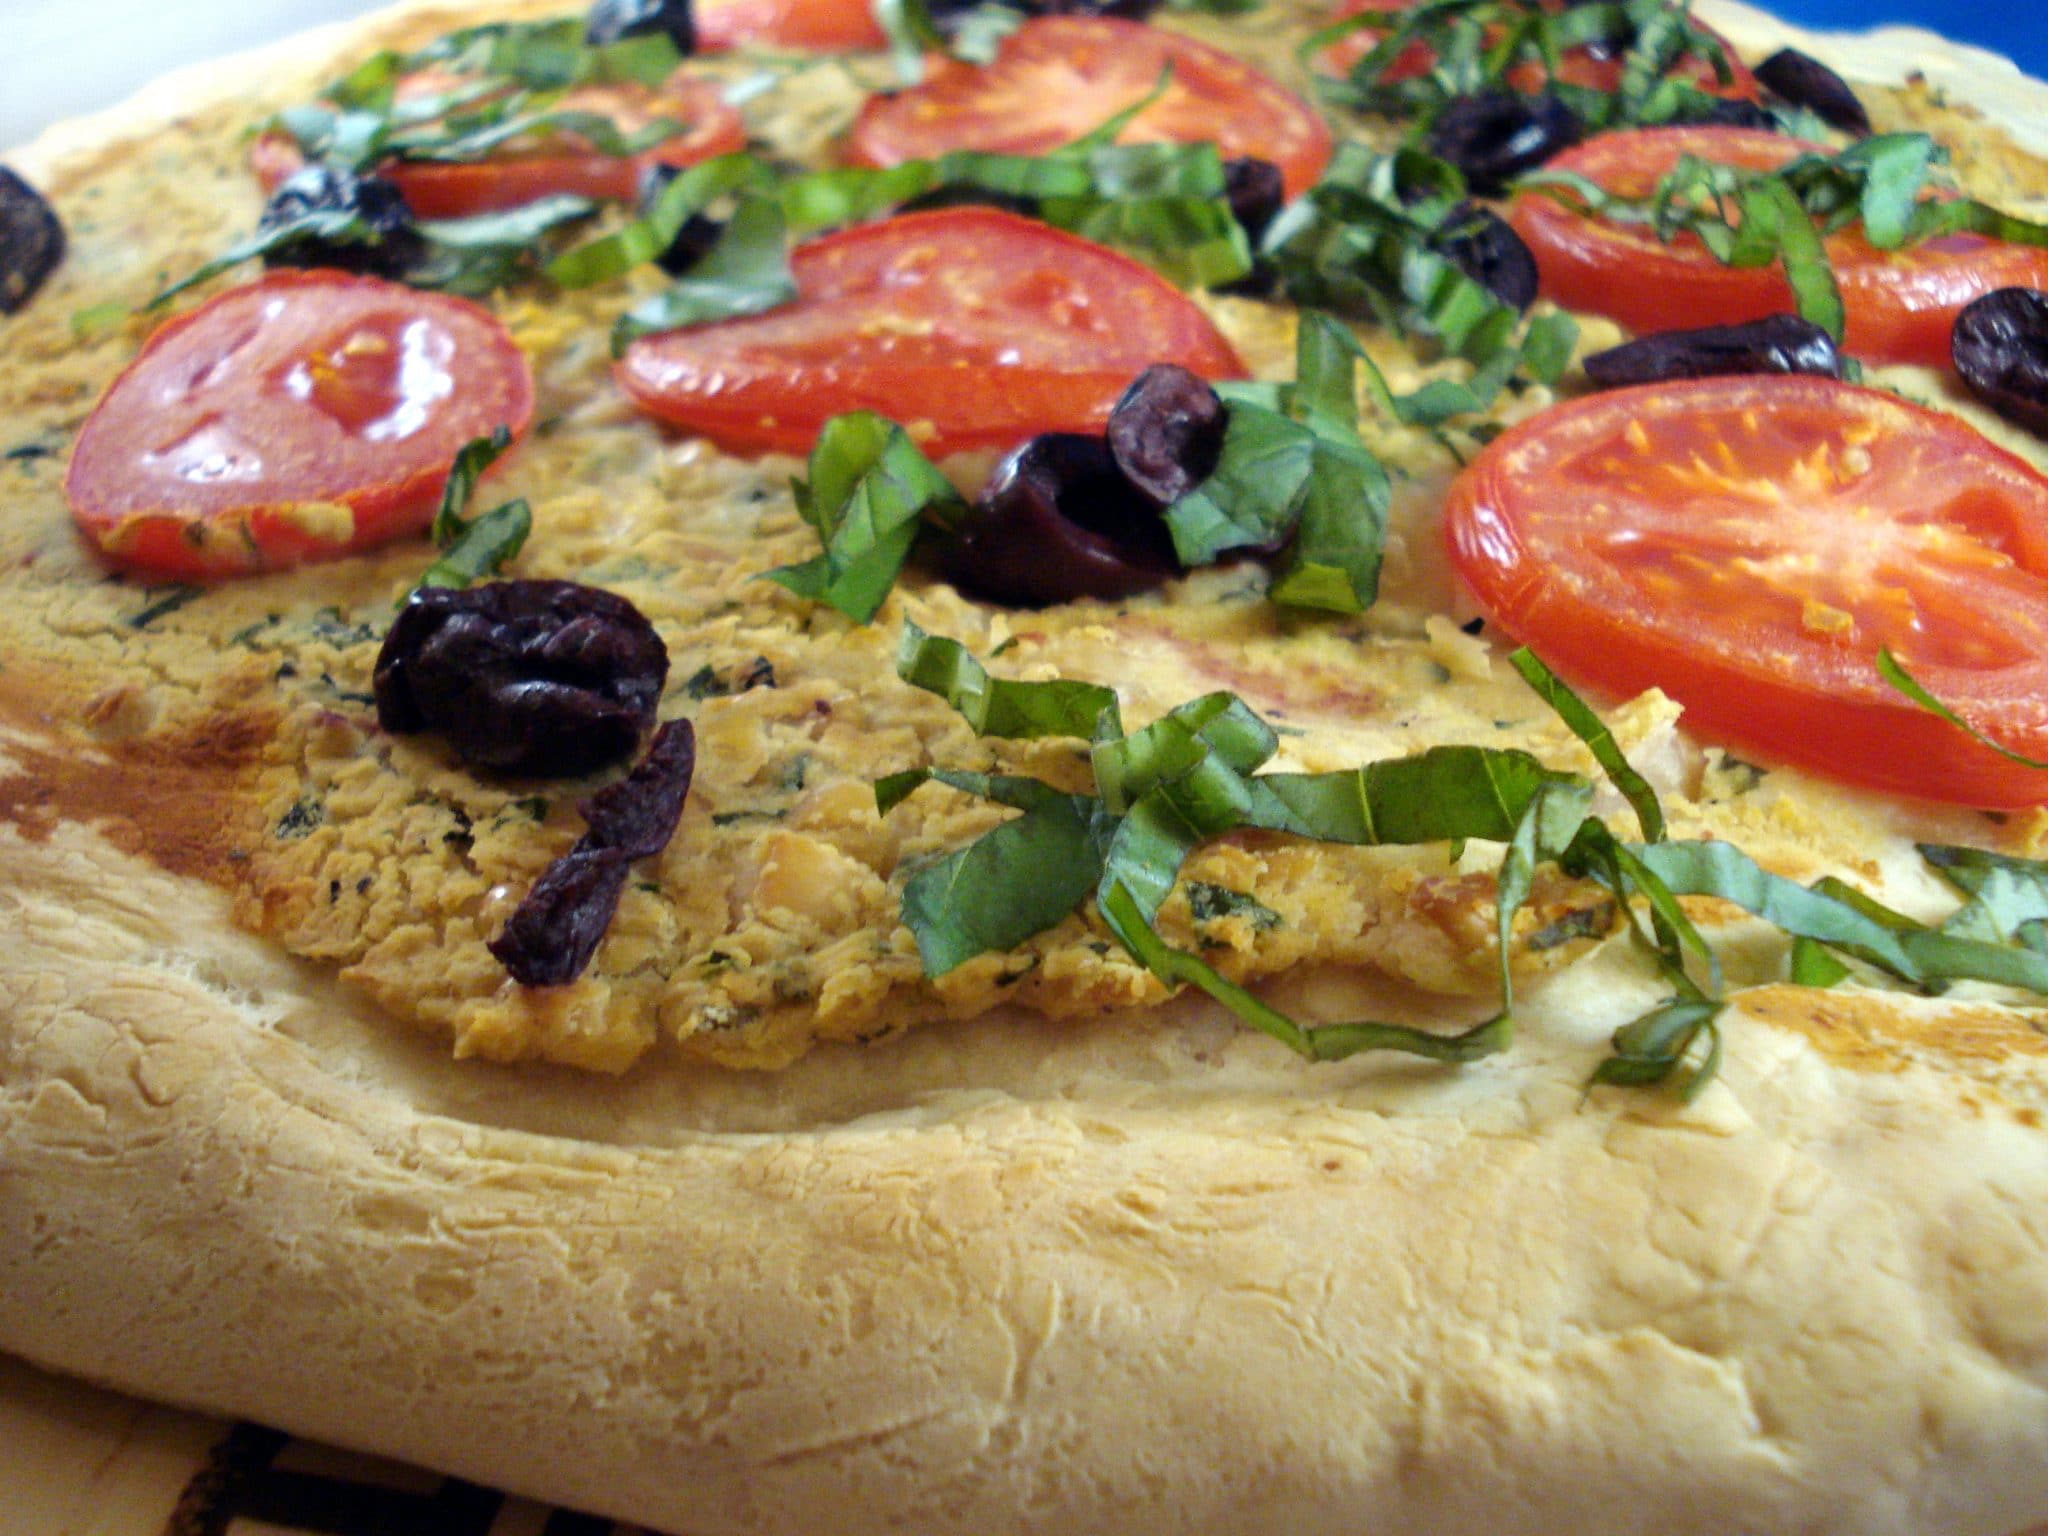 Close up of vegan pizza with homemade cashew cheese, tomatoes, and black olives